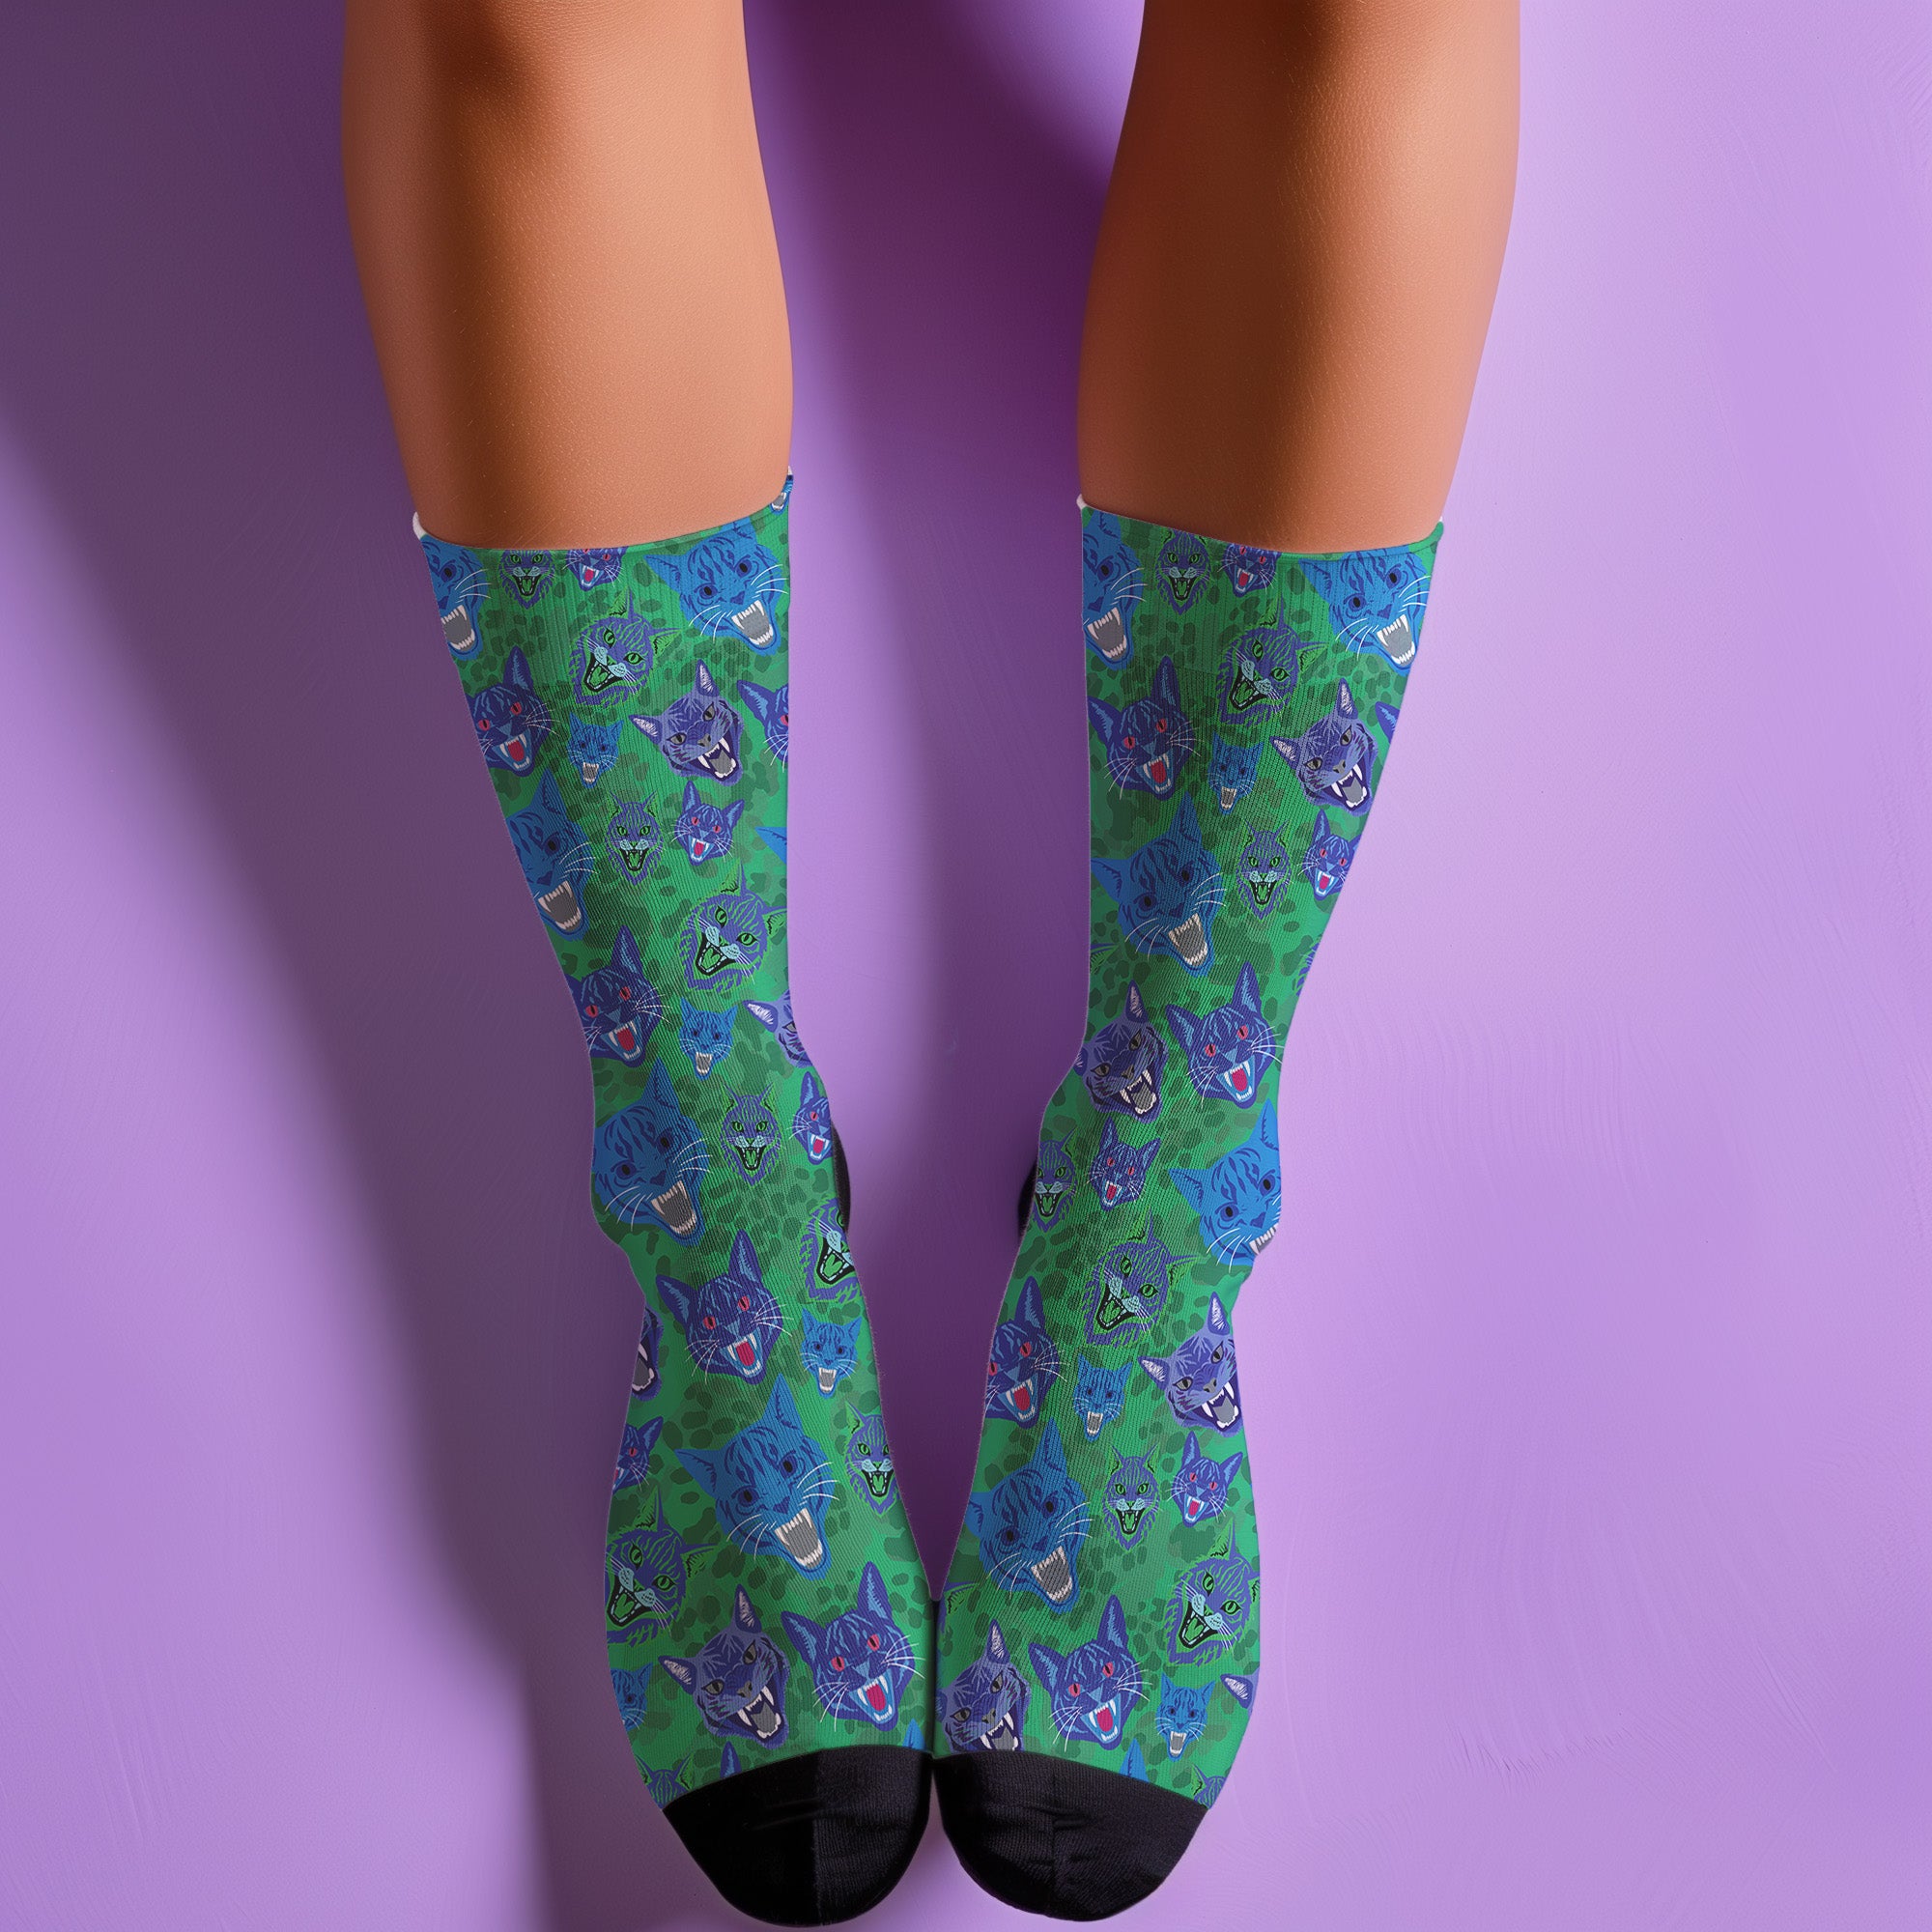 un and playful socks adorned with vibrant tiger head motifs on a green background, with black heels and toes, ideal for animal lovers and those who enjoy unique designs